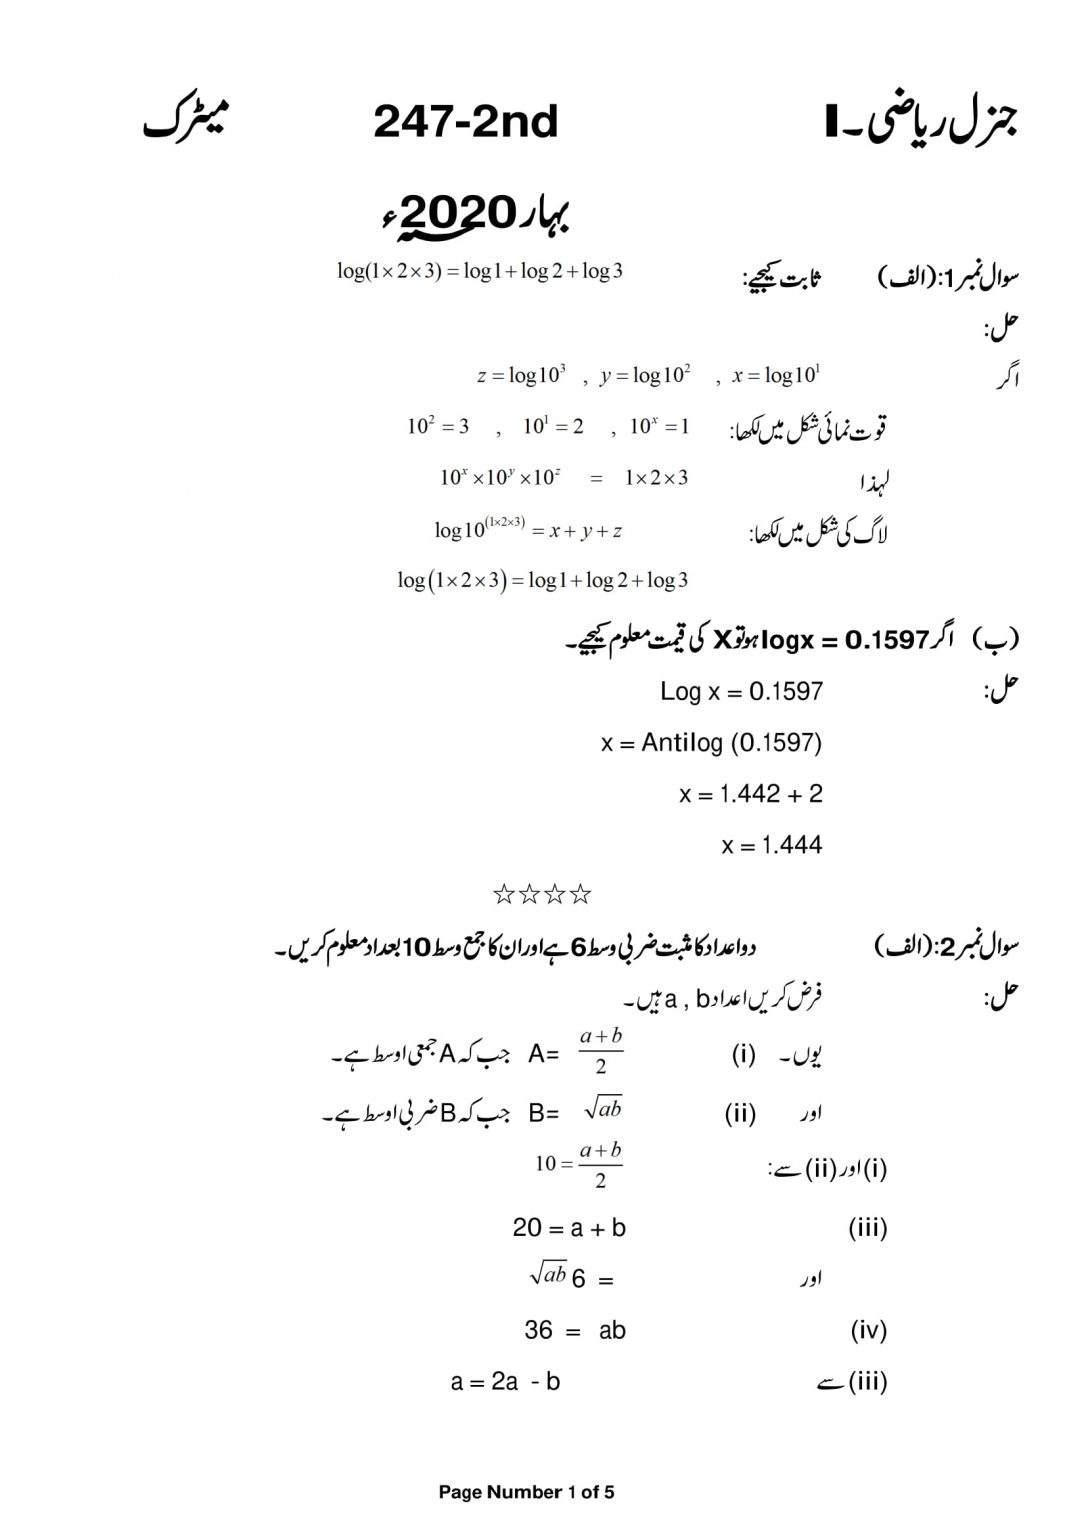 aiou assignments questions spring 2021